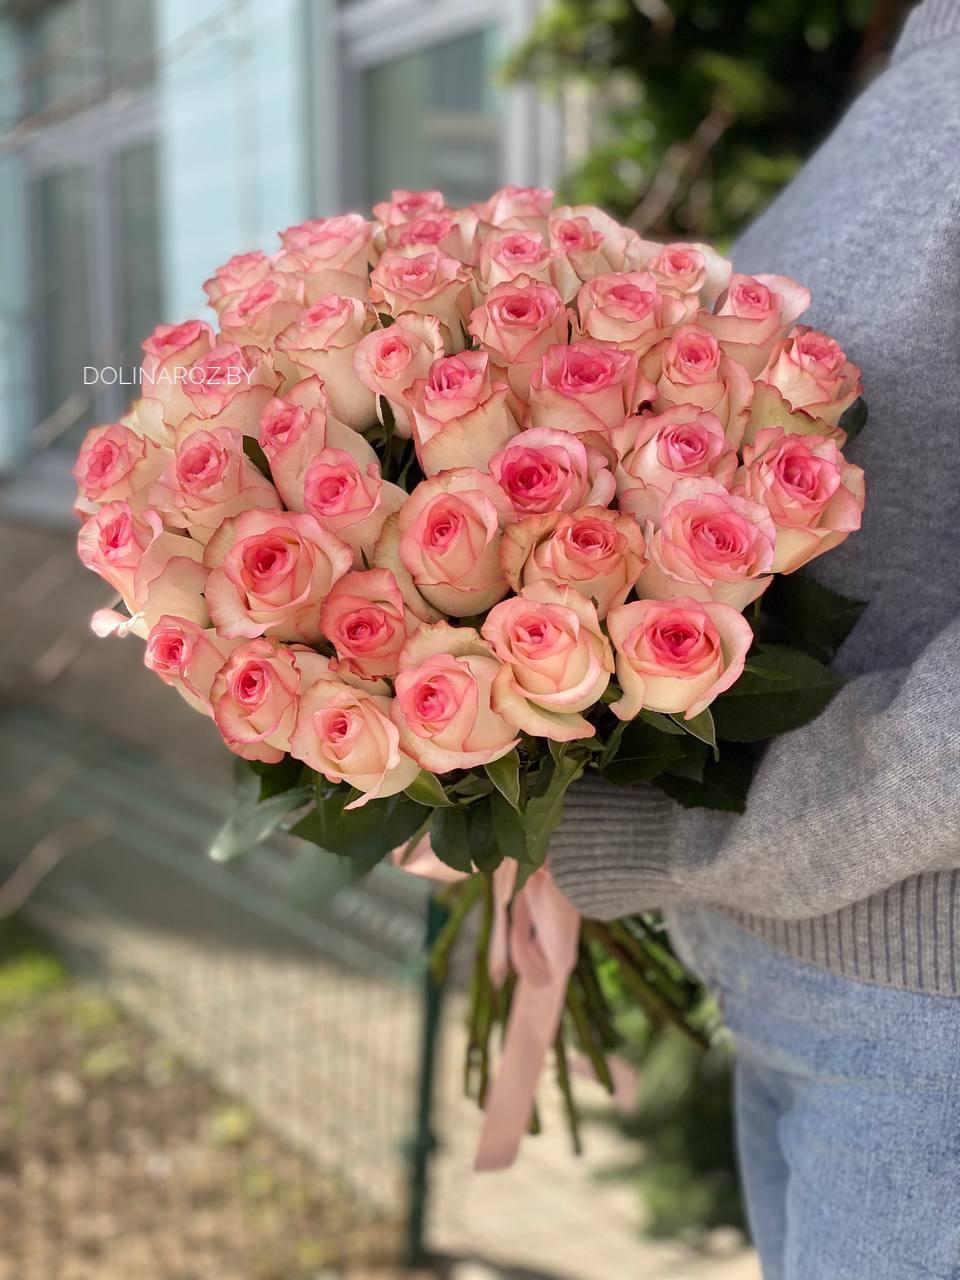 Bouquet of roses “Irma”